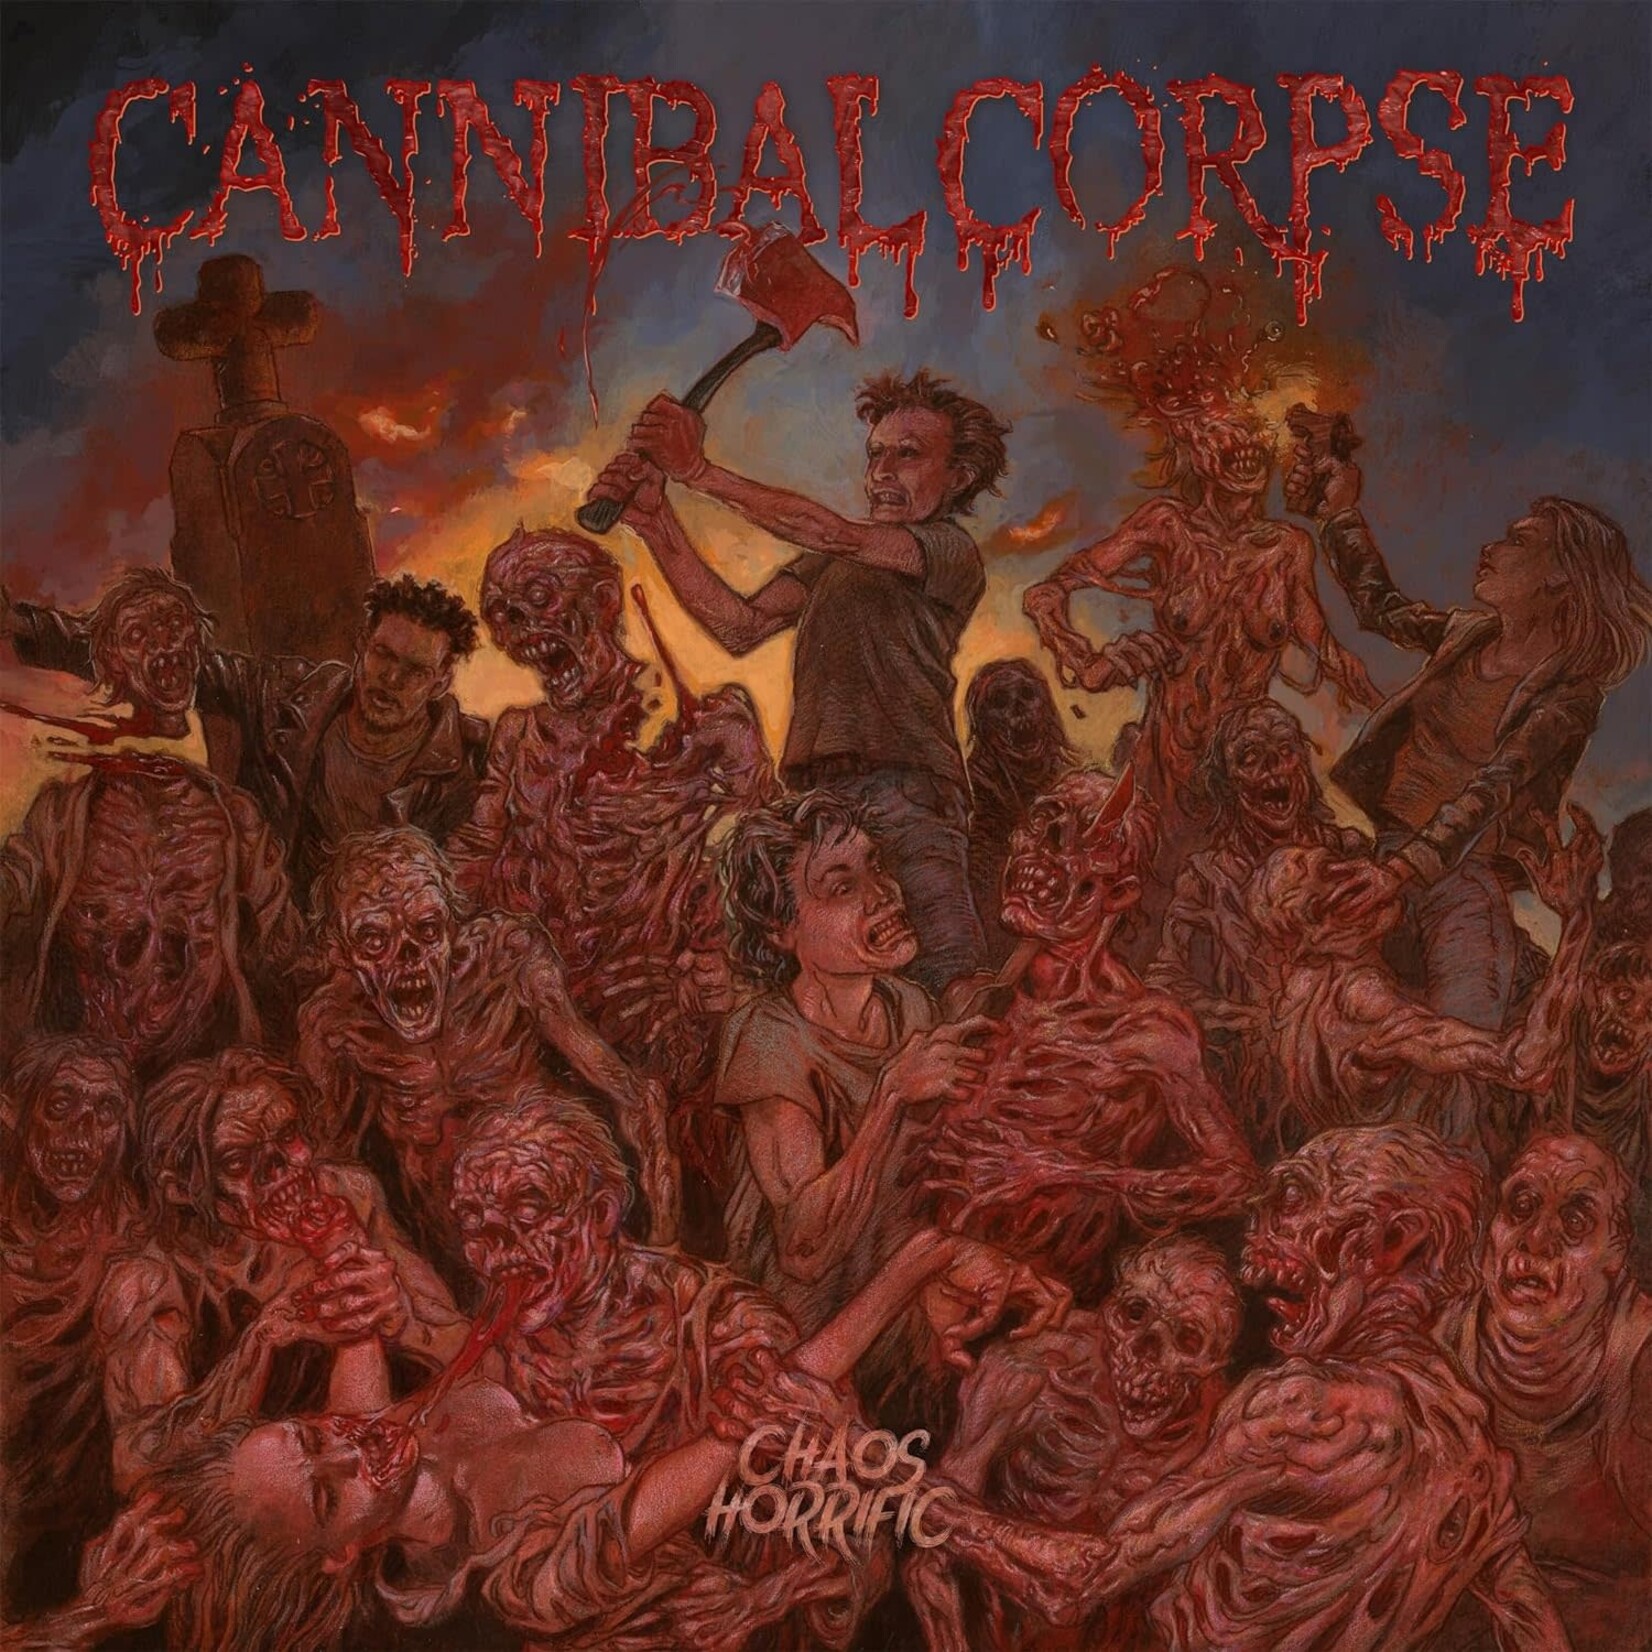 Vinyl Cannibal Corpse -  Chaos Horrific (Red and Orange Ink Spots)